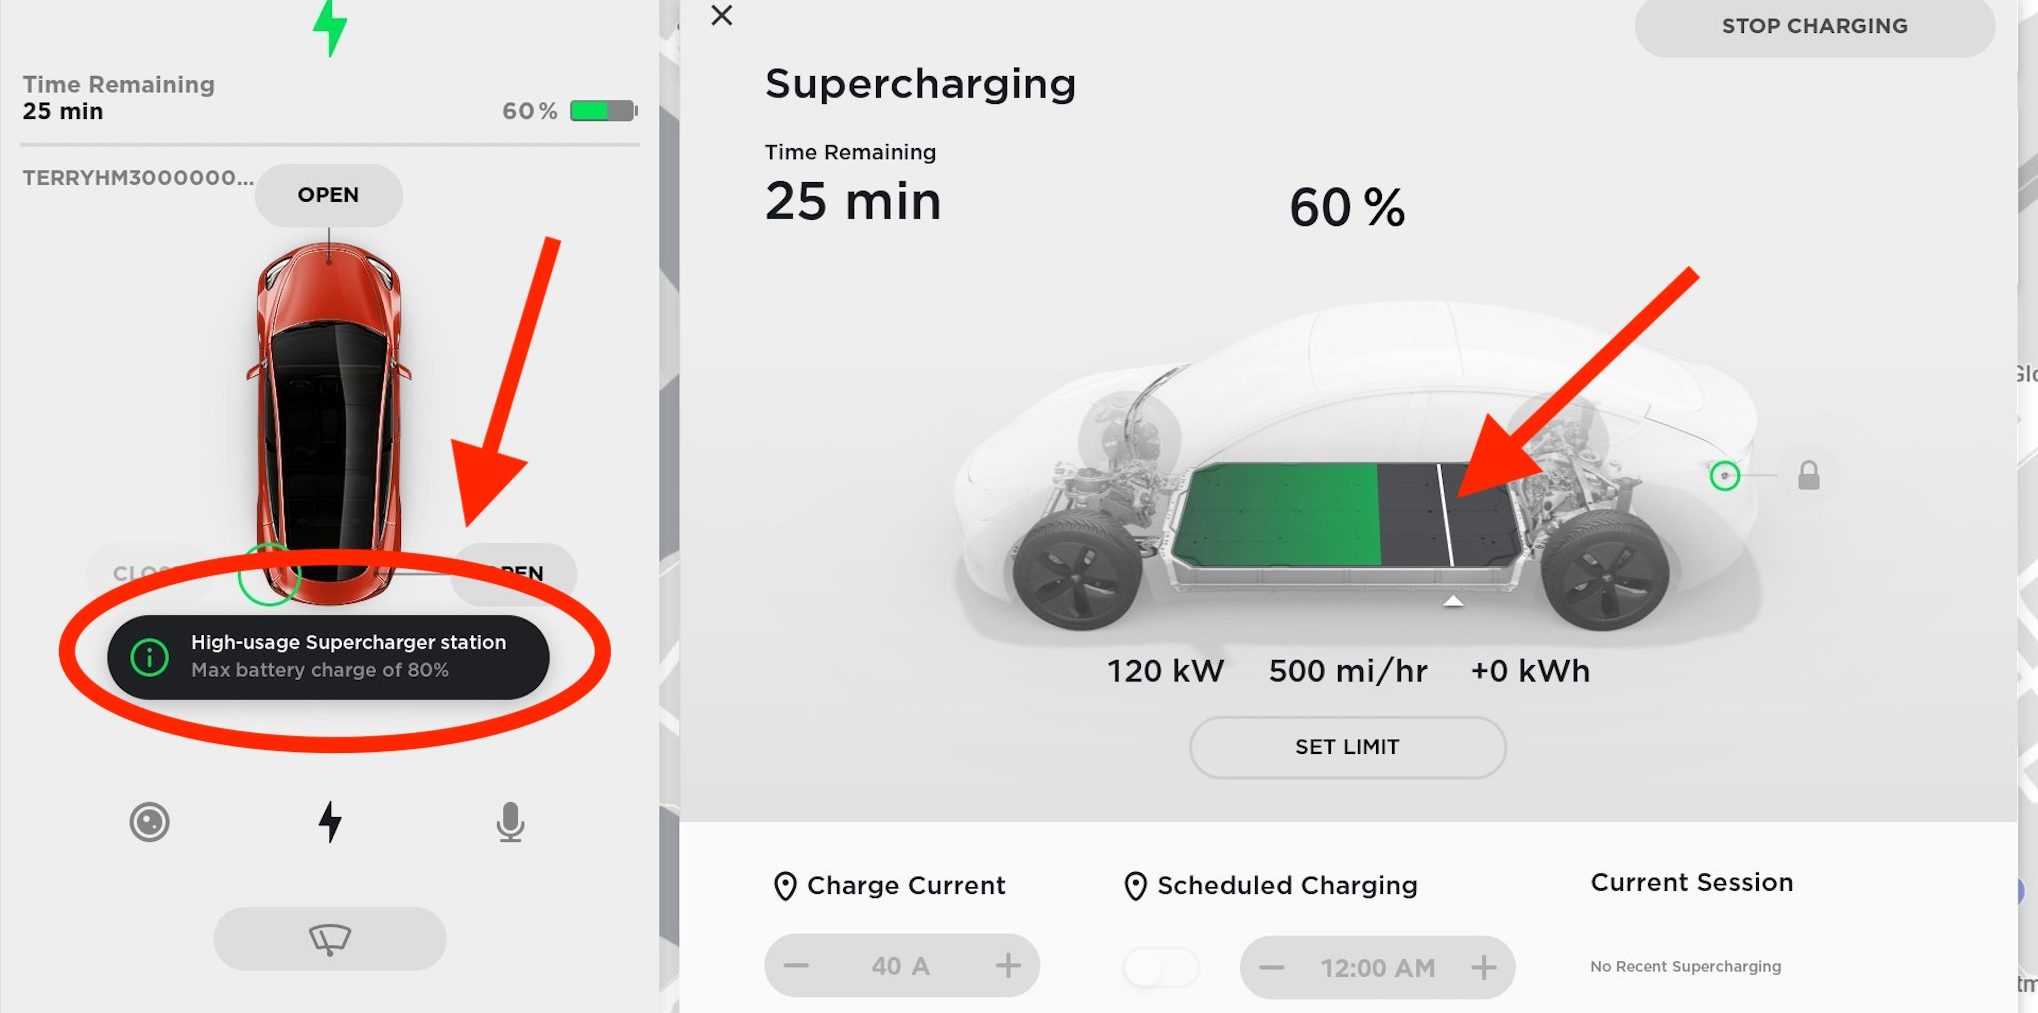 charge limitation at busy Superchargers 